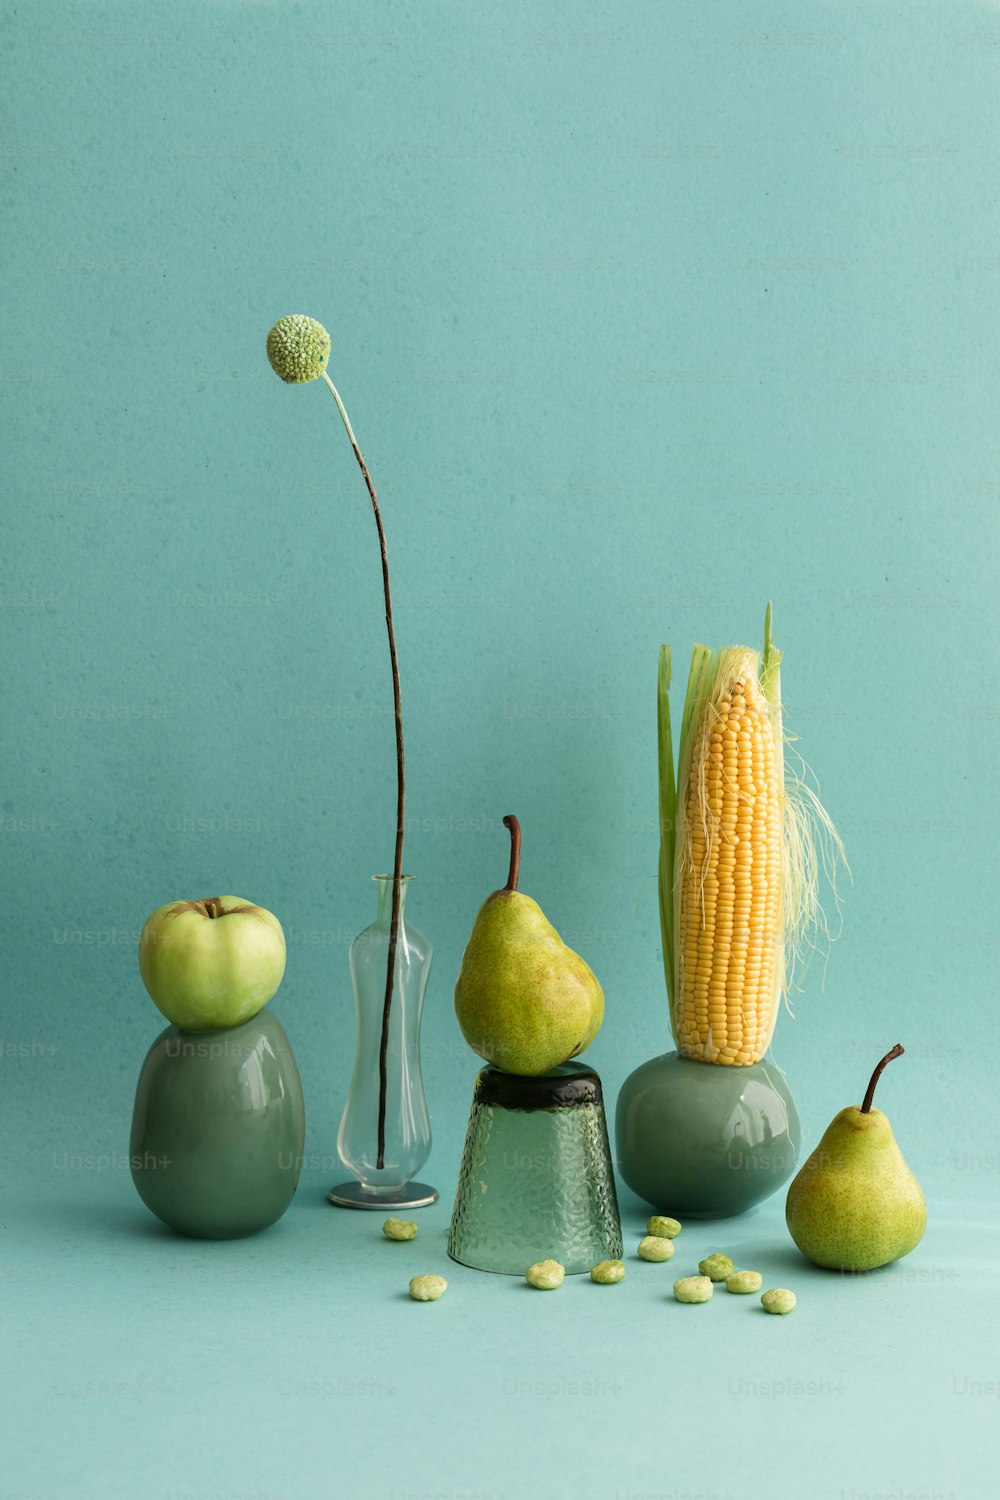 a corn on the cob, a vase, and two pears on a